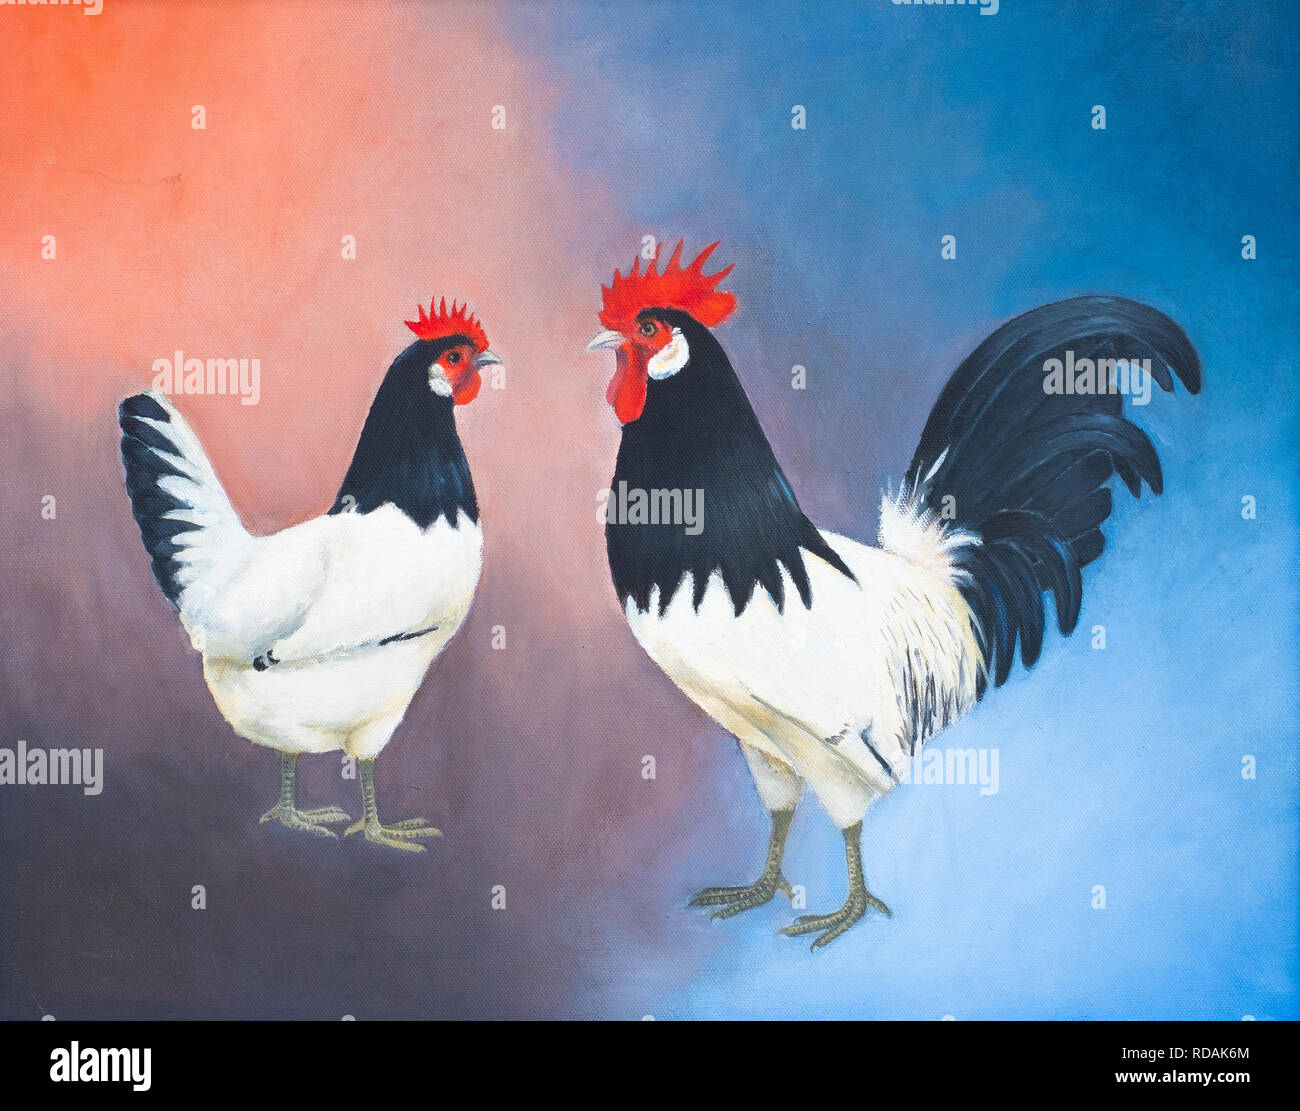 hand-painted oil painting of a rooster and chicken of the same breed with black head and tail and a white body against a colored background Stock Photo